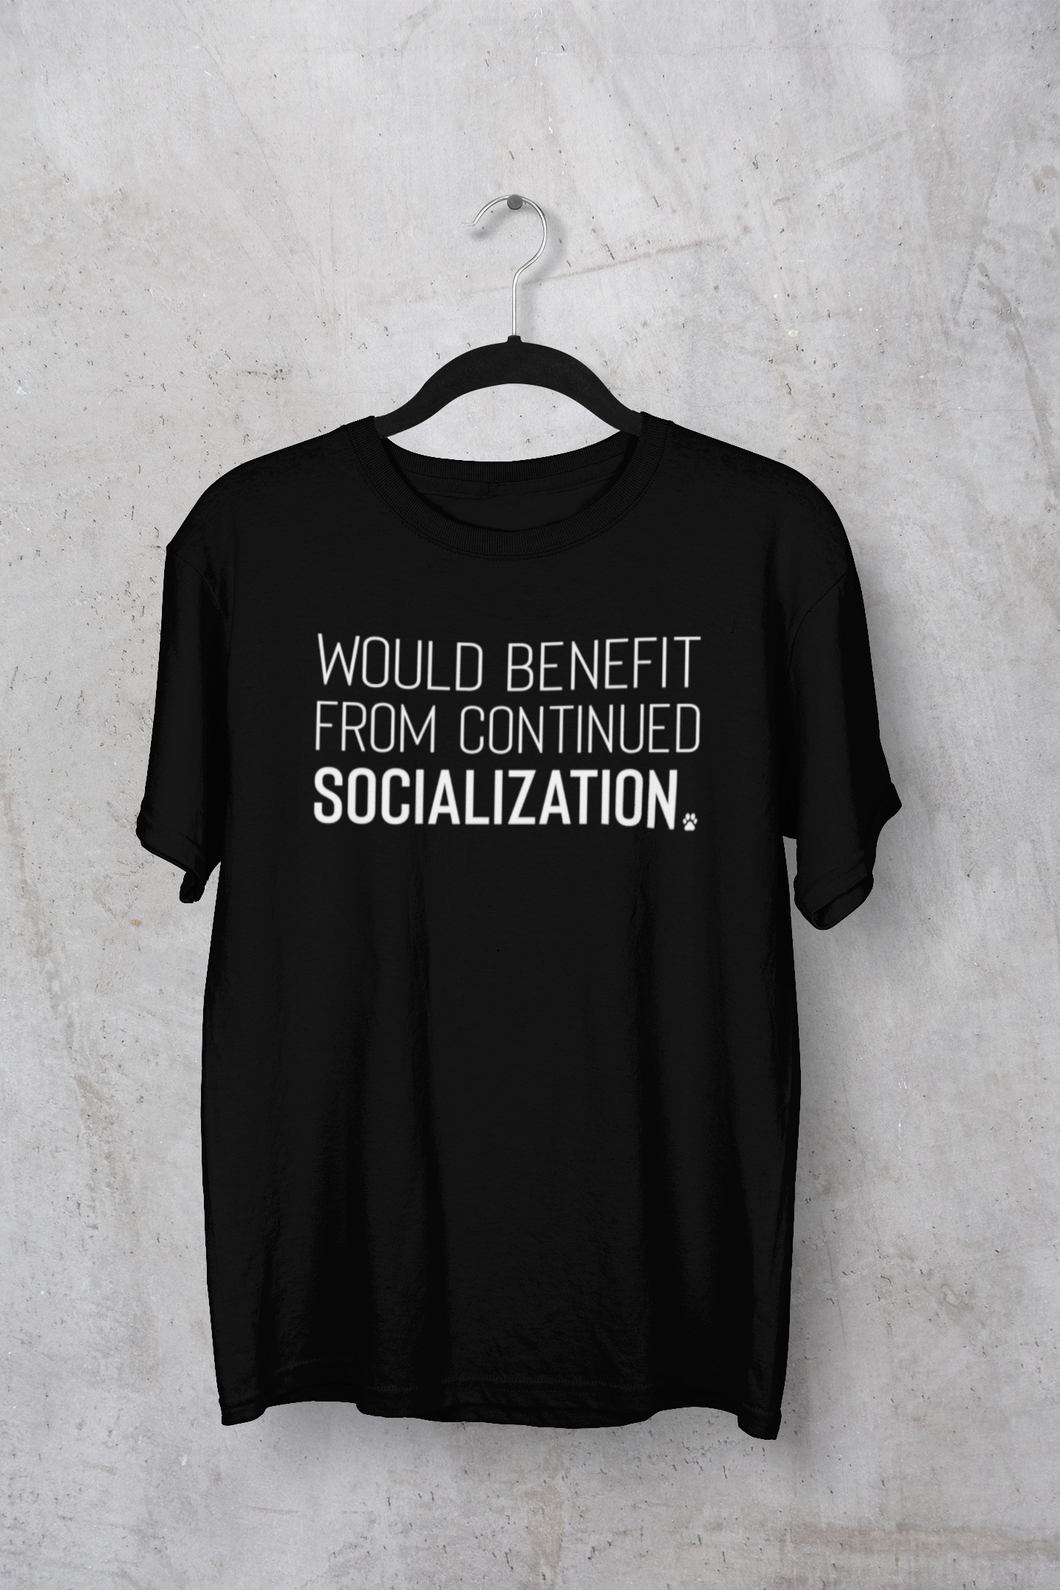 Would Benefit From Continued Socialization Men's/Unisex or Women's T-shirt